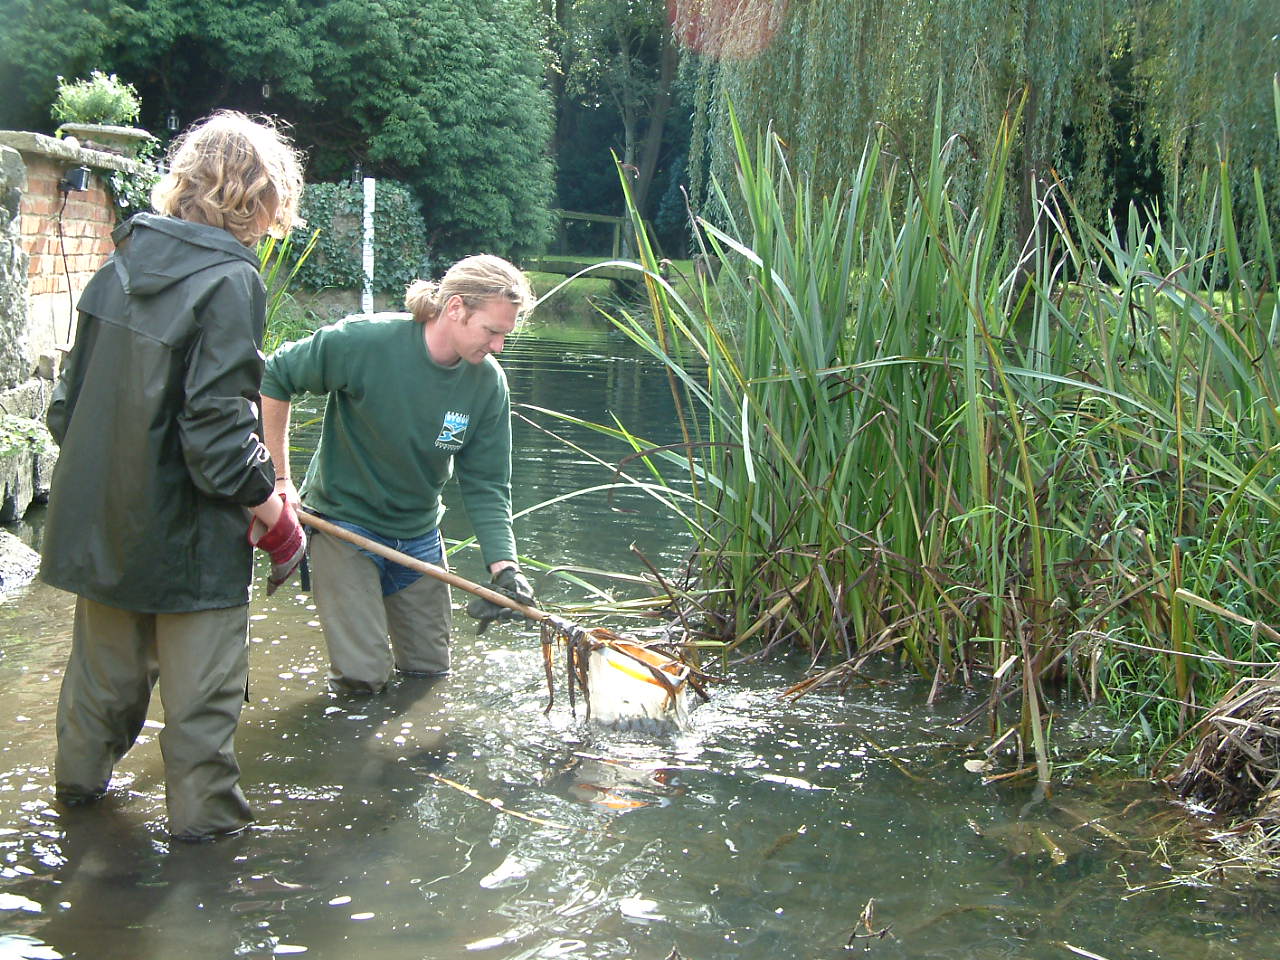 2 kscp staff wearing waders in river using nets for surveying